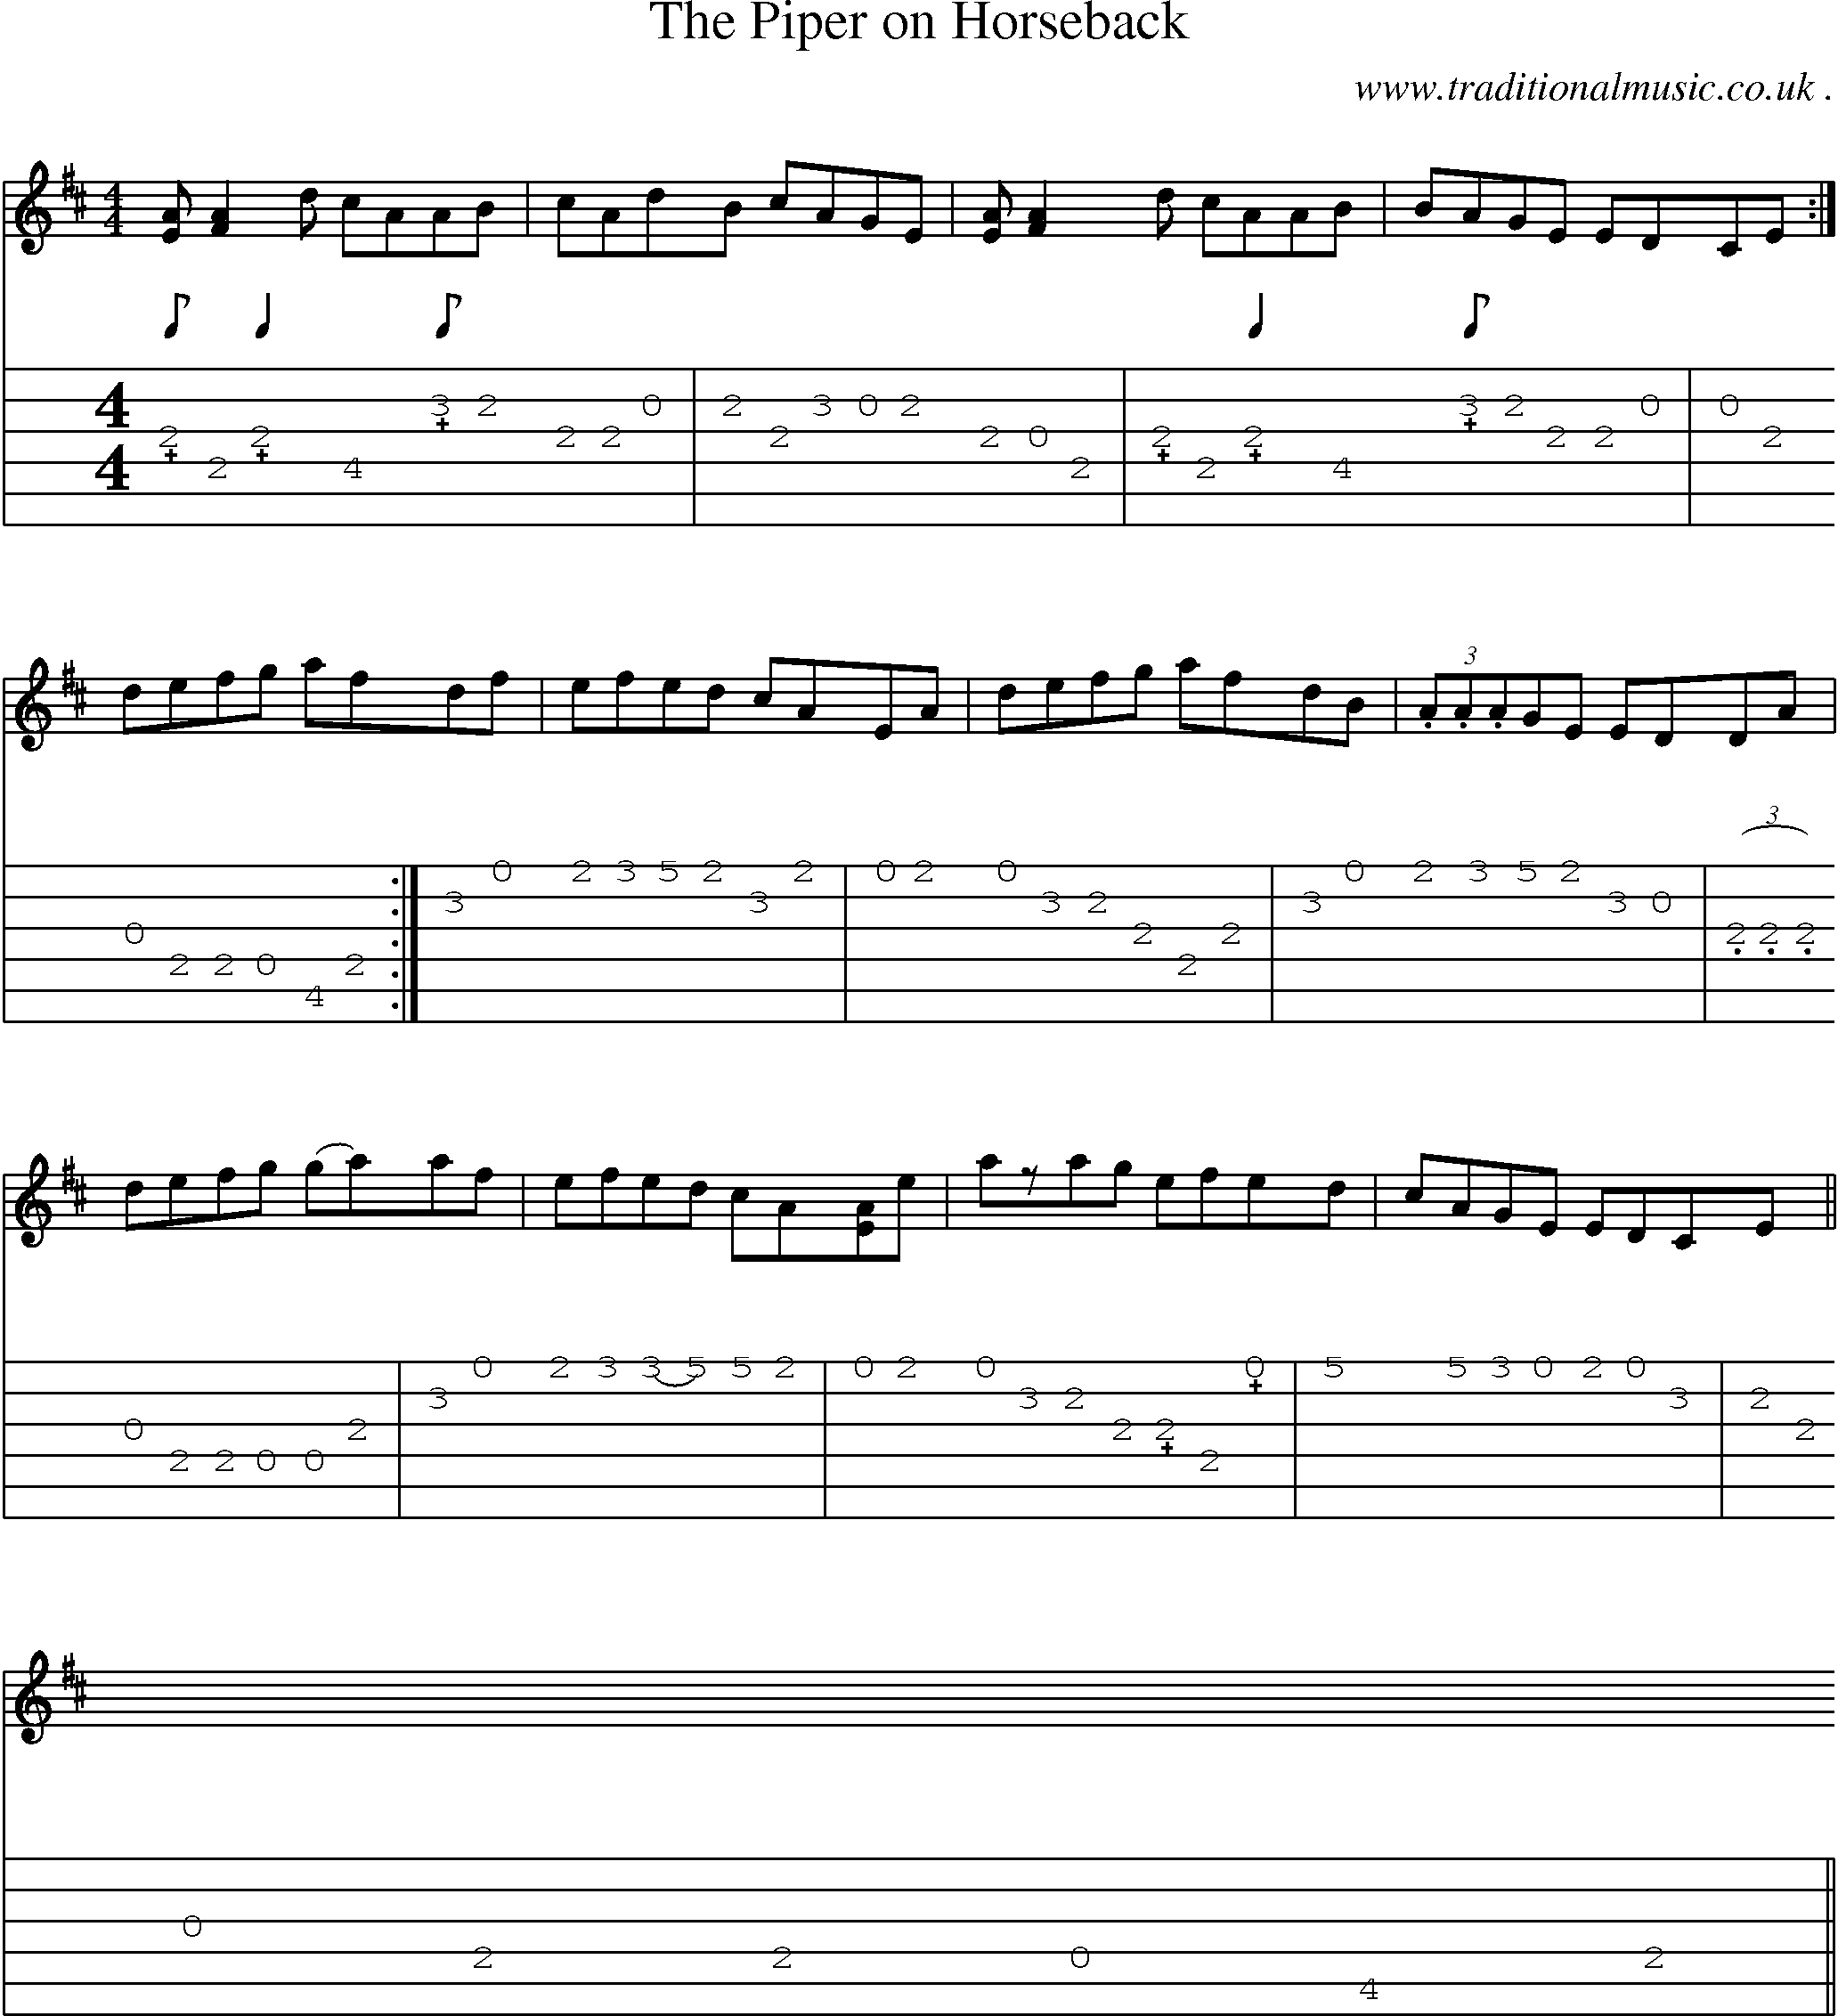 Sheet-Music and Guitar Tabs for The Piper On Horseback